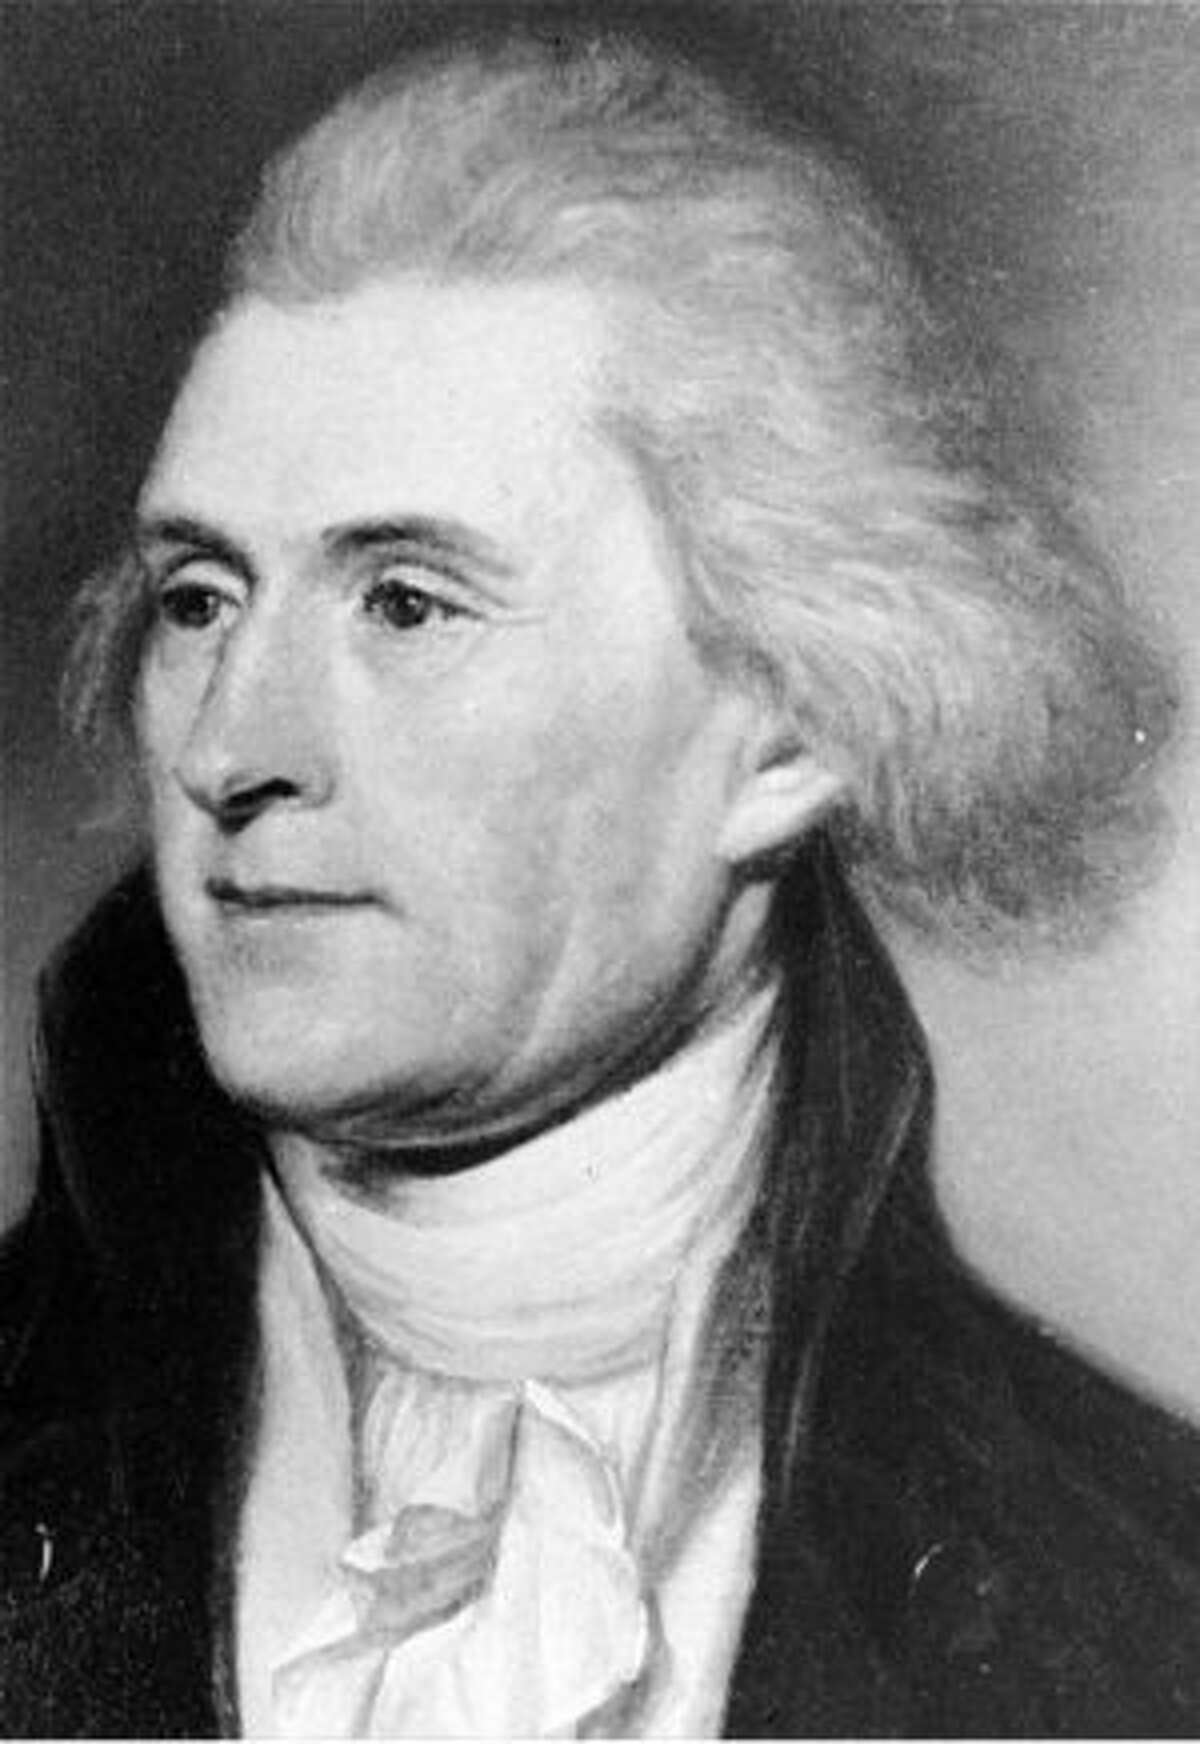 The State Board of Education dismisses Thomas Jefferson's significance.